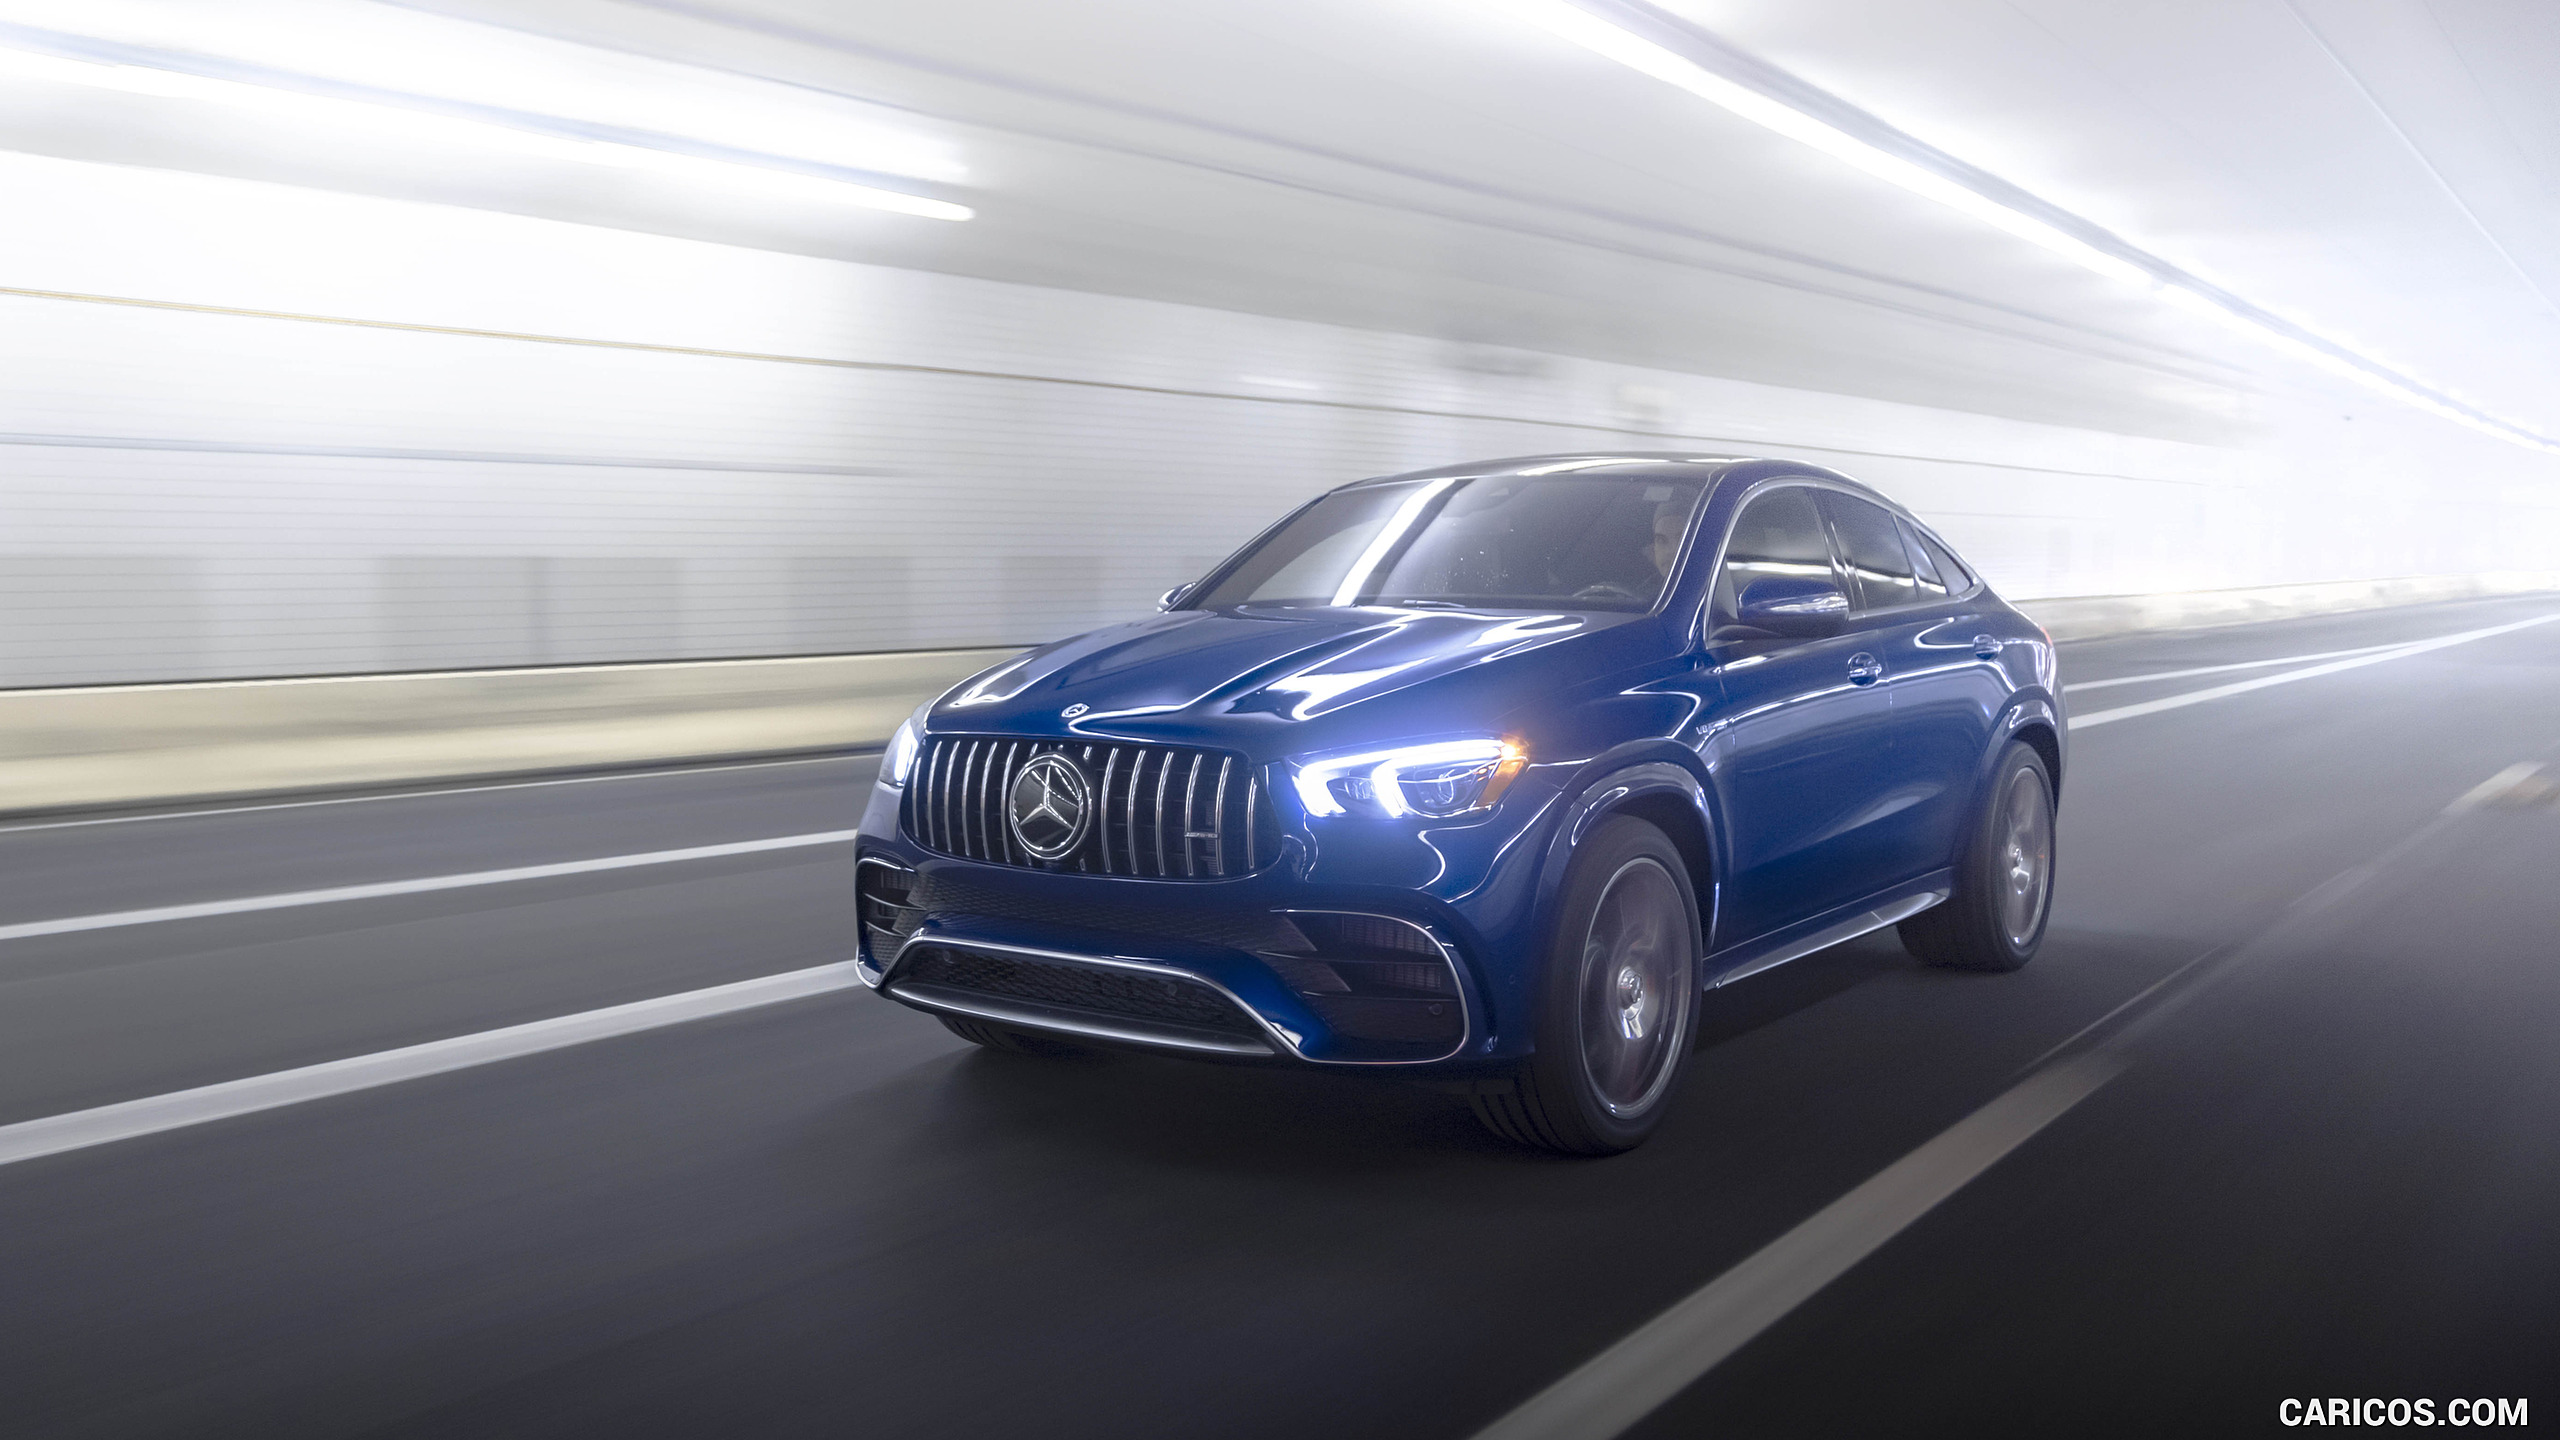 2021 Mercedes-AMG GLE 63 S Coupe (US-Spec) - Front Three-Quarter, #33 of 66